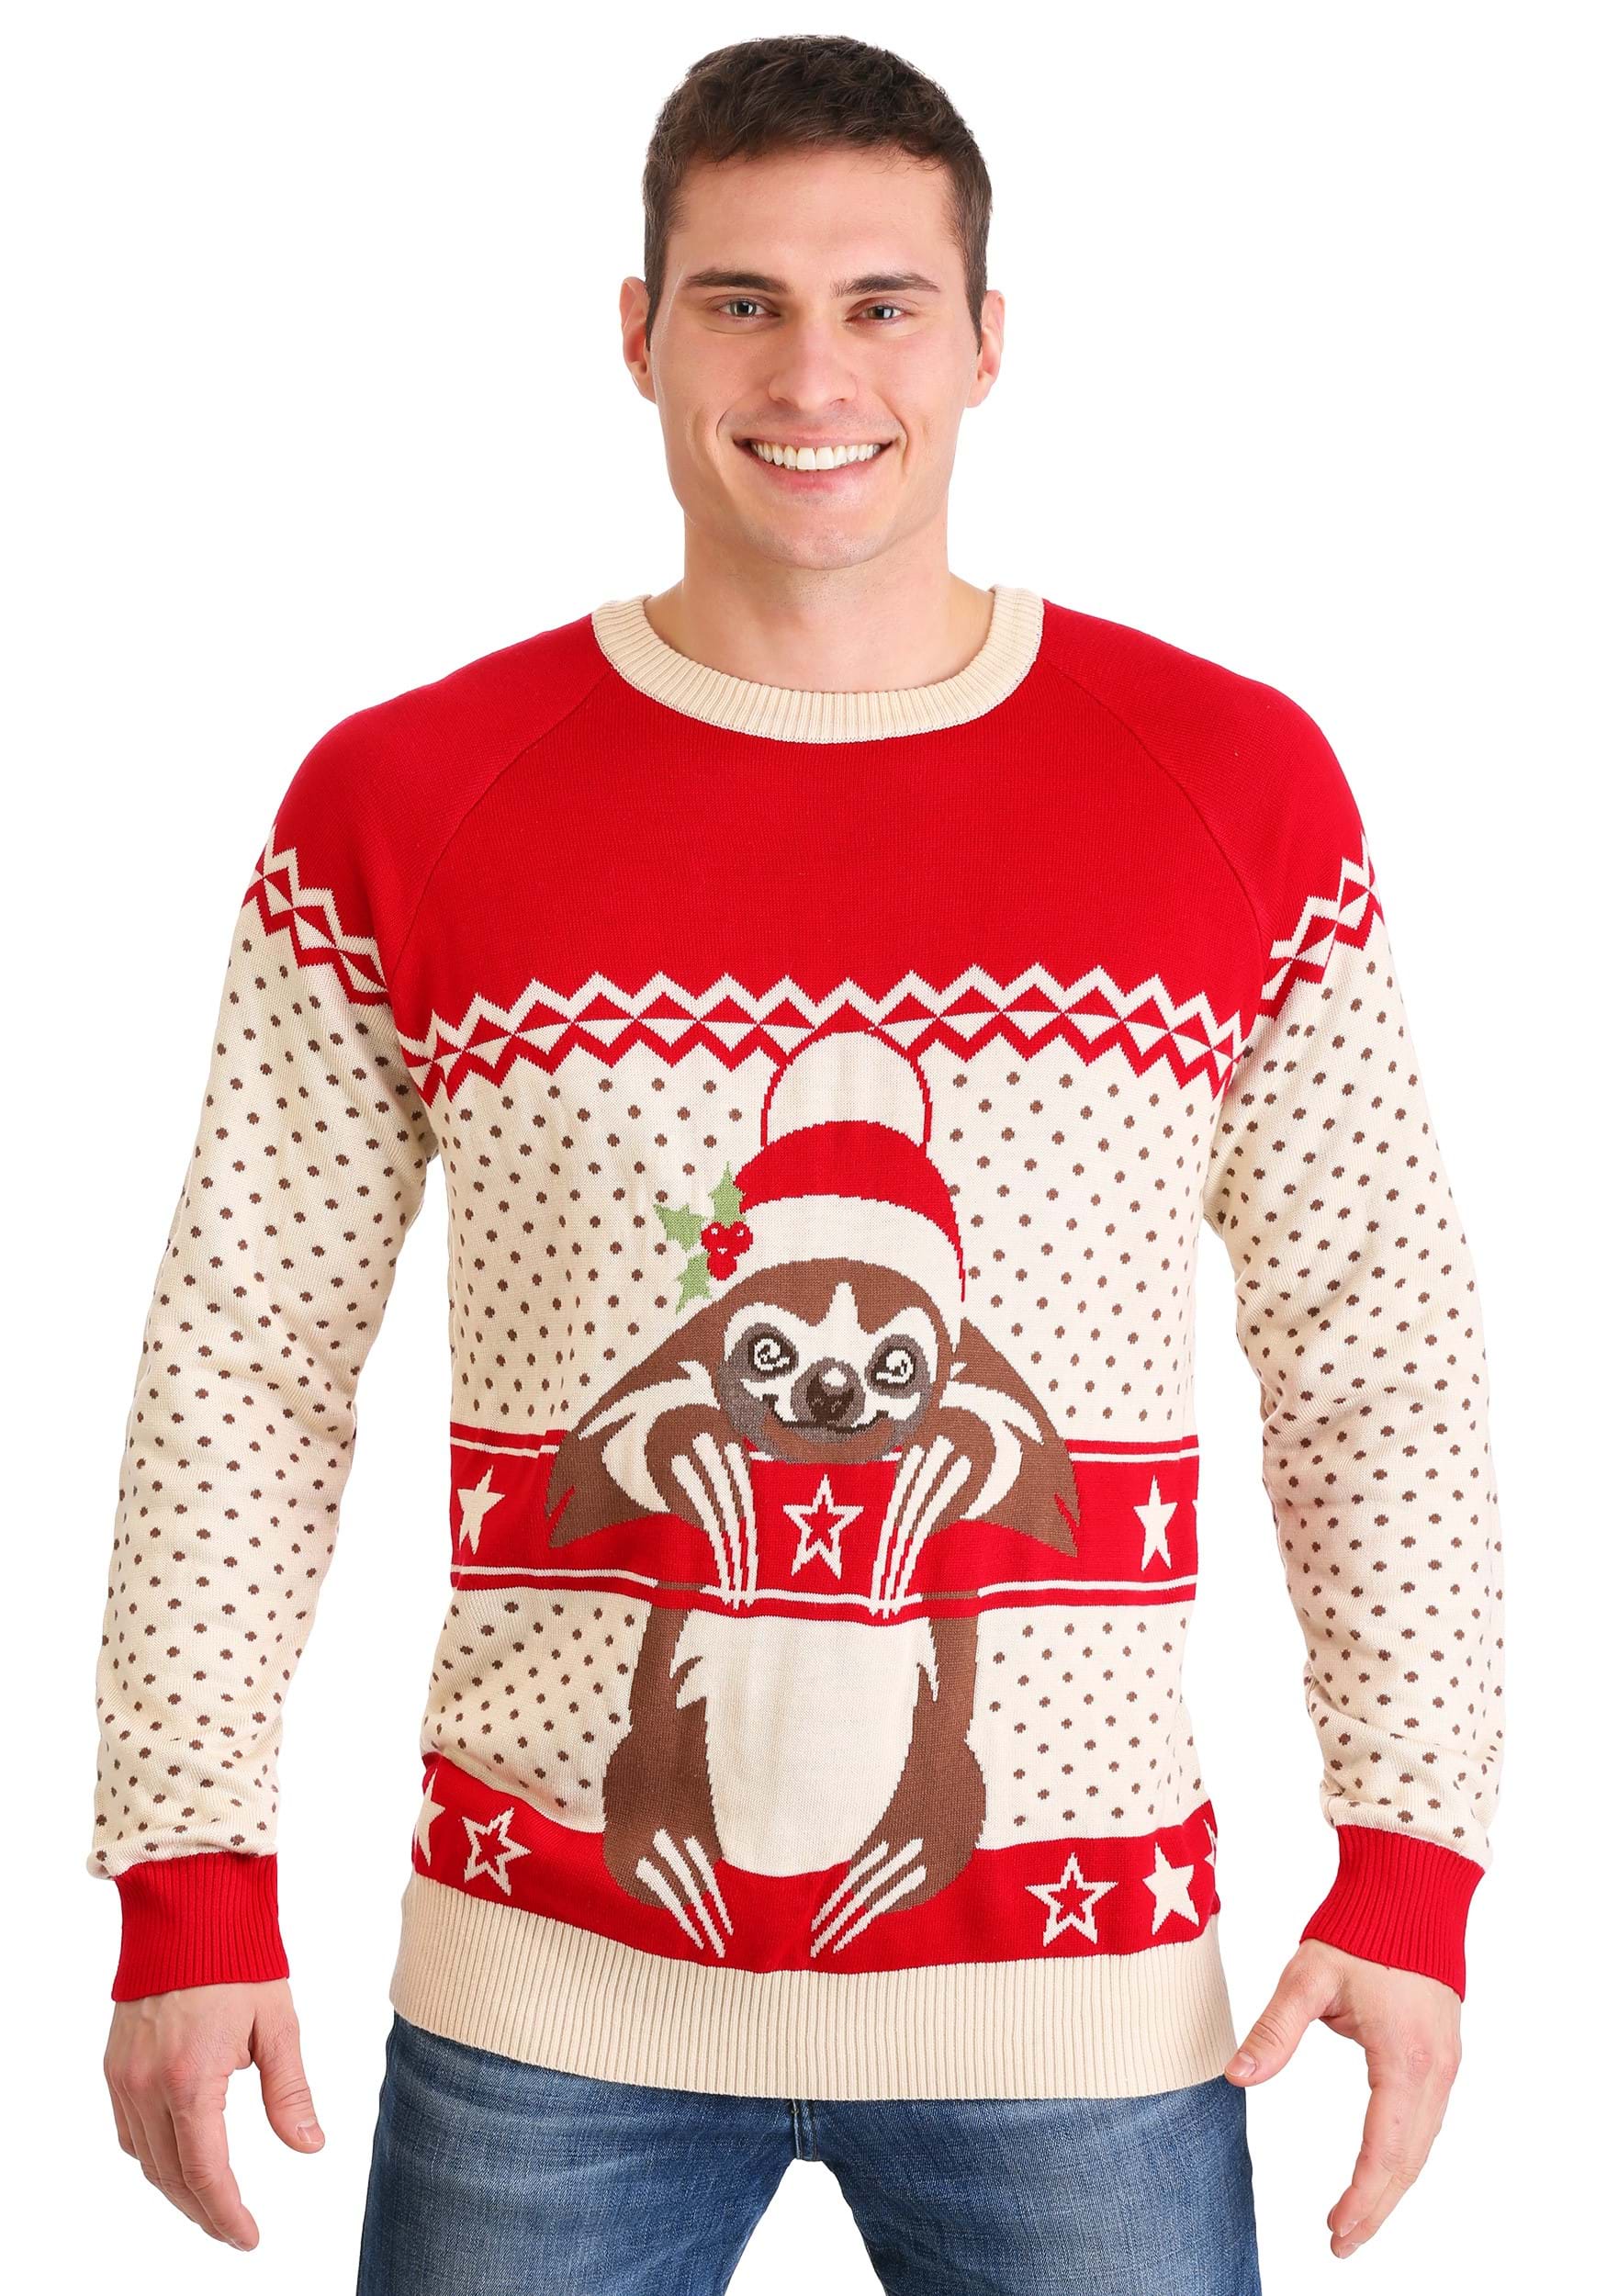 Photos - Fancy Dress Christmas FUN Wear Sloth Ugly  Sweater for Adults Brown/Red 